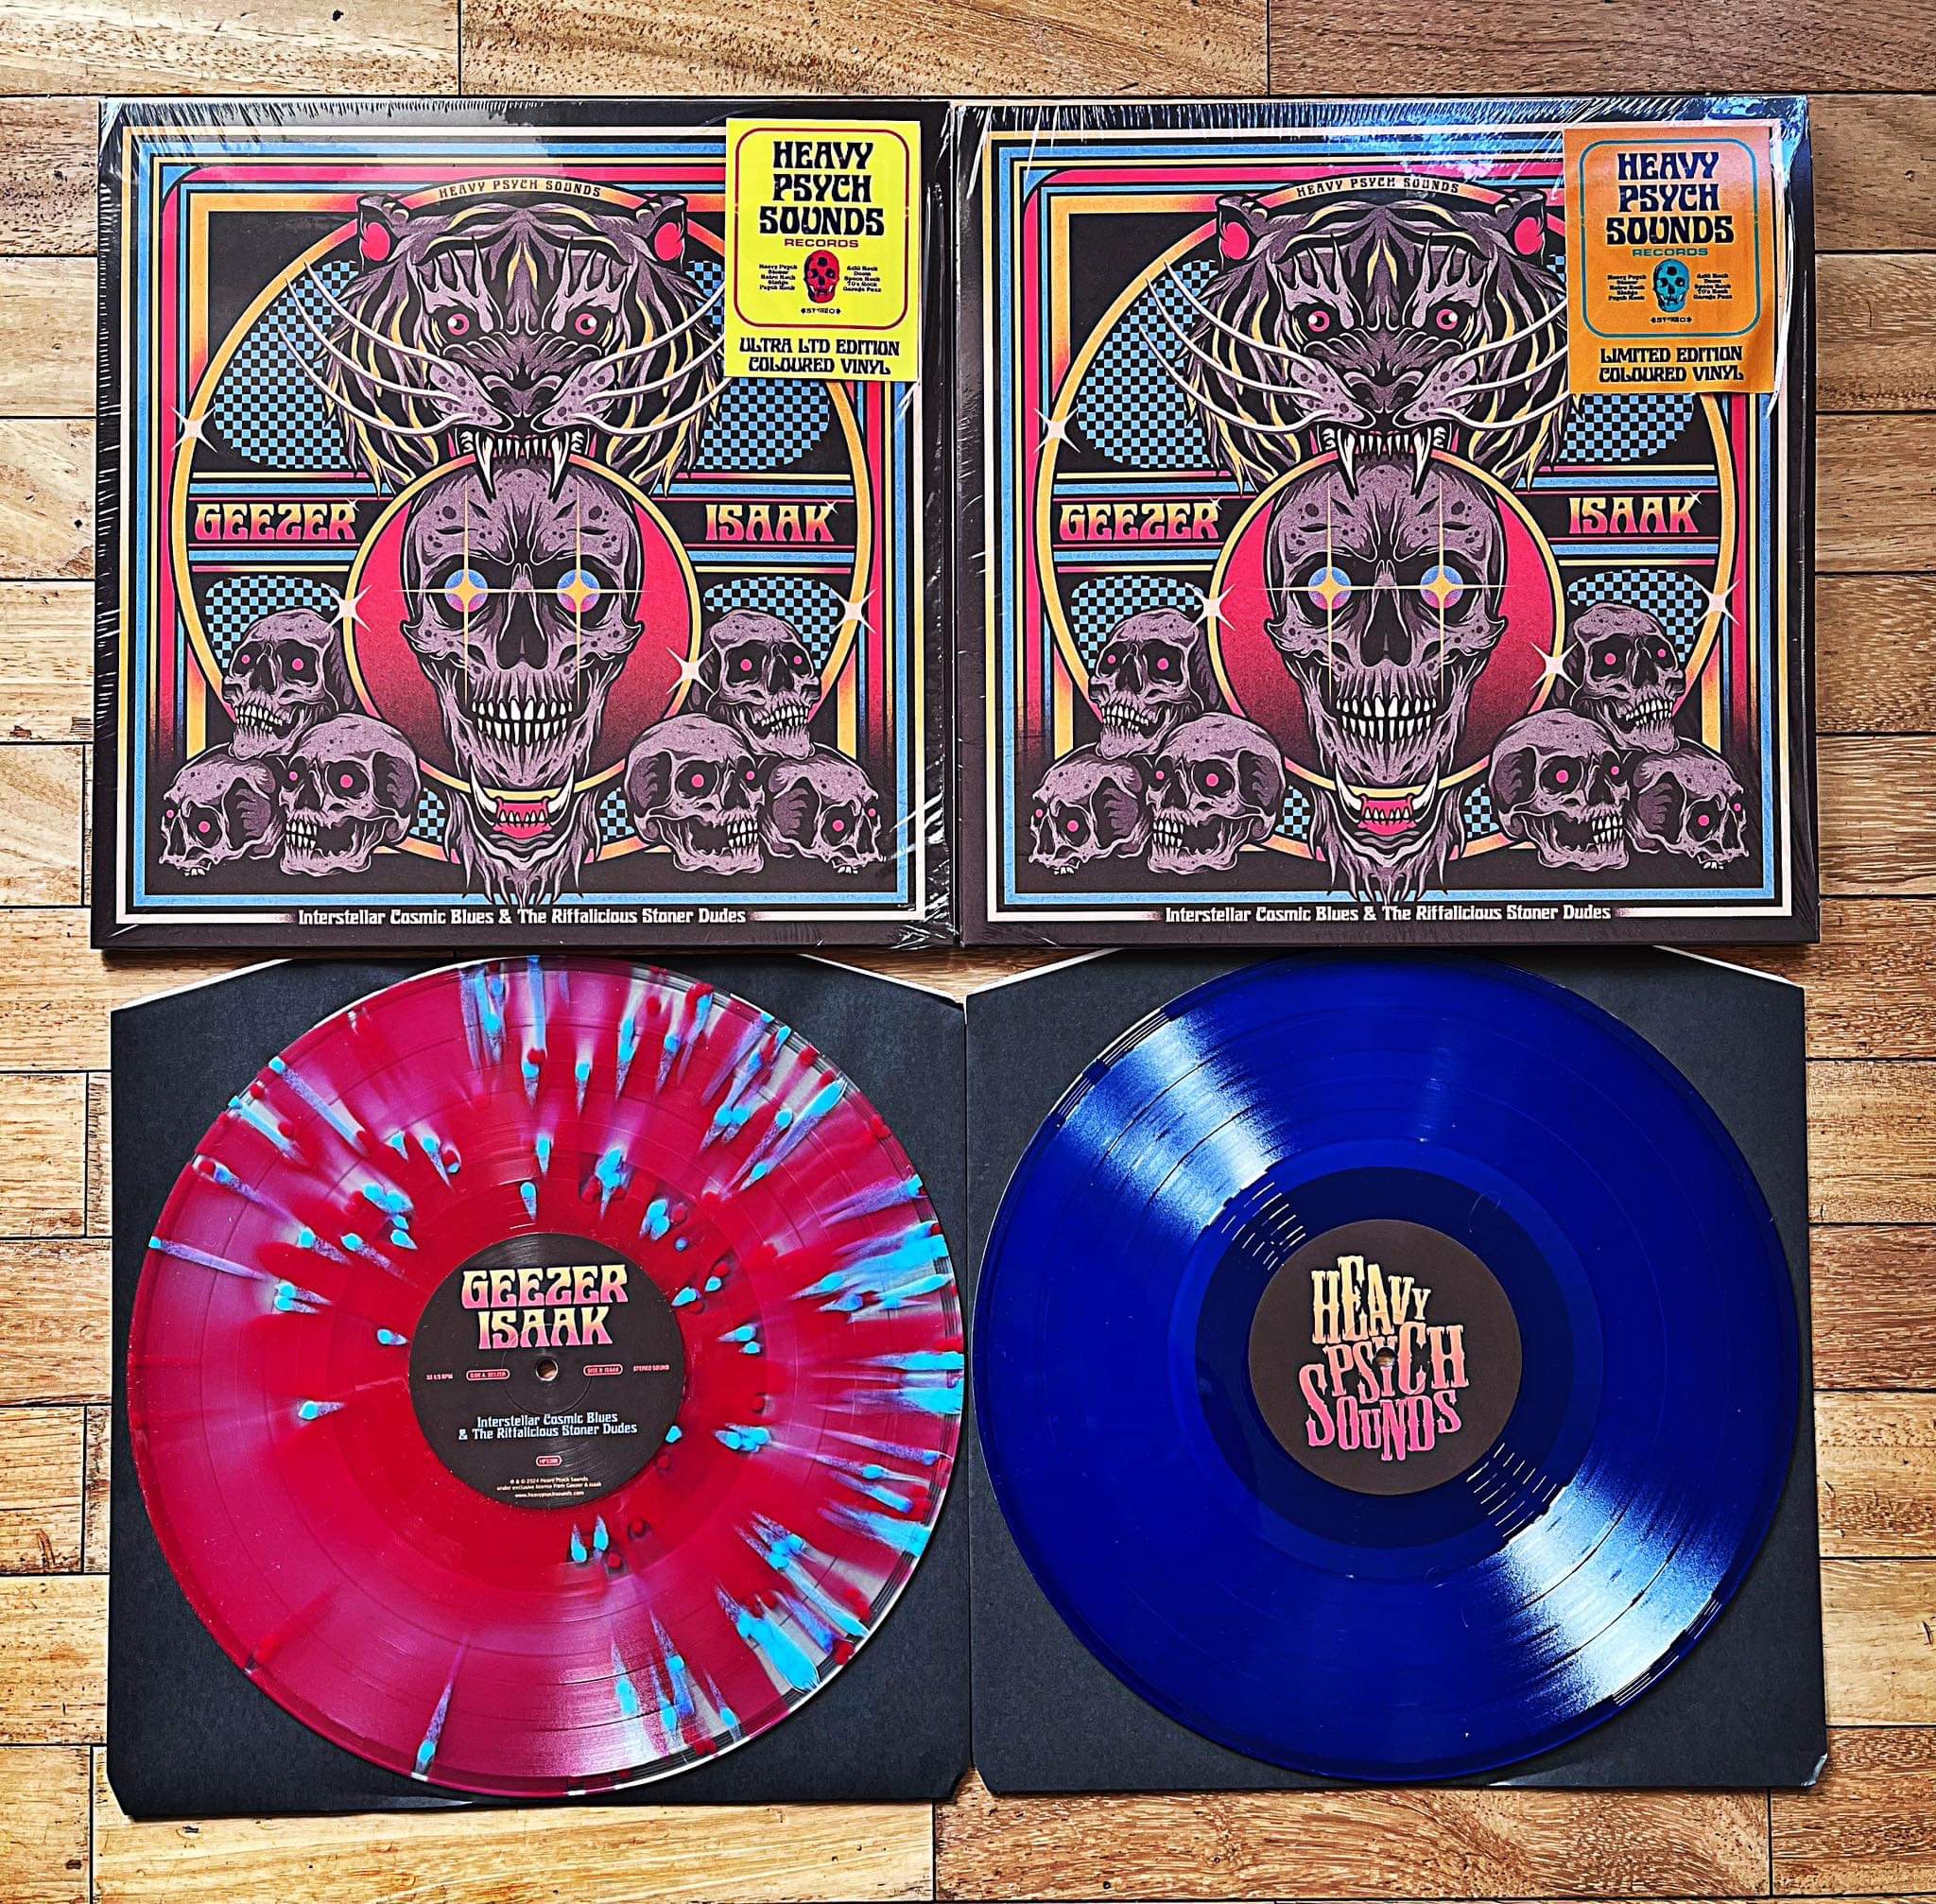 Heavy Psych Sounds to present GEEZER//ISAAK – Interstellar Cosmic Blues & The Riffalicious Stoner Dudes – OUT TODAY !!